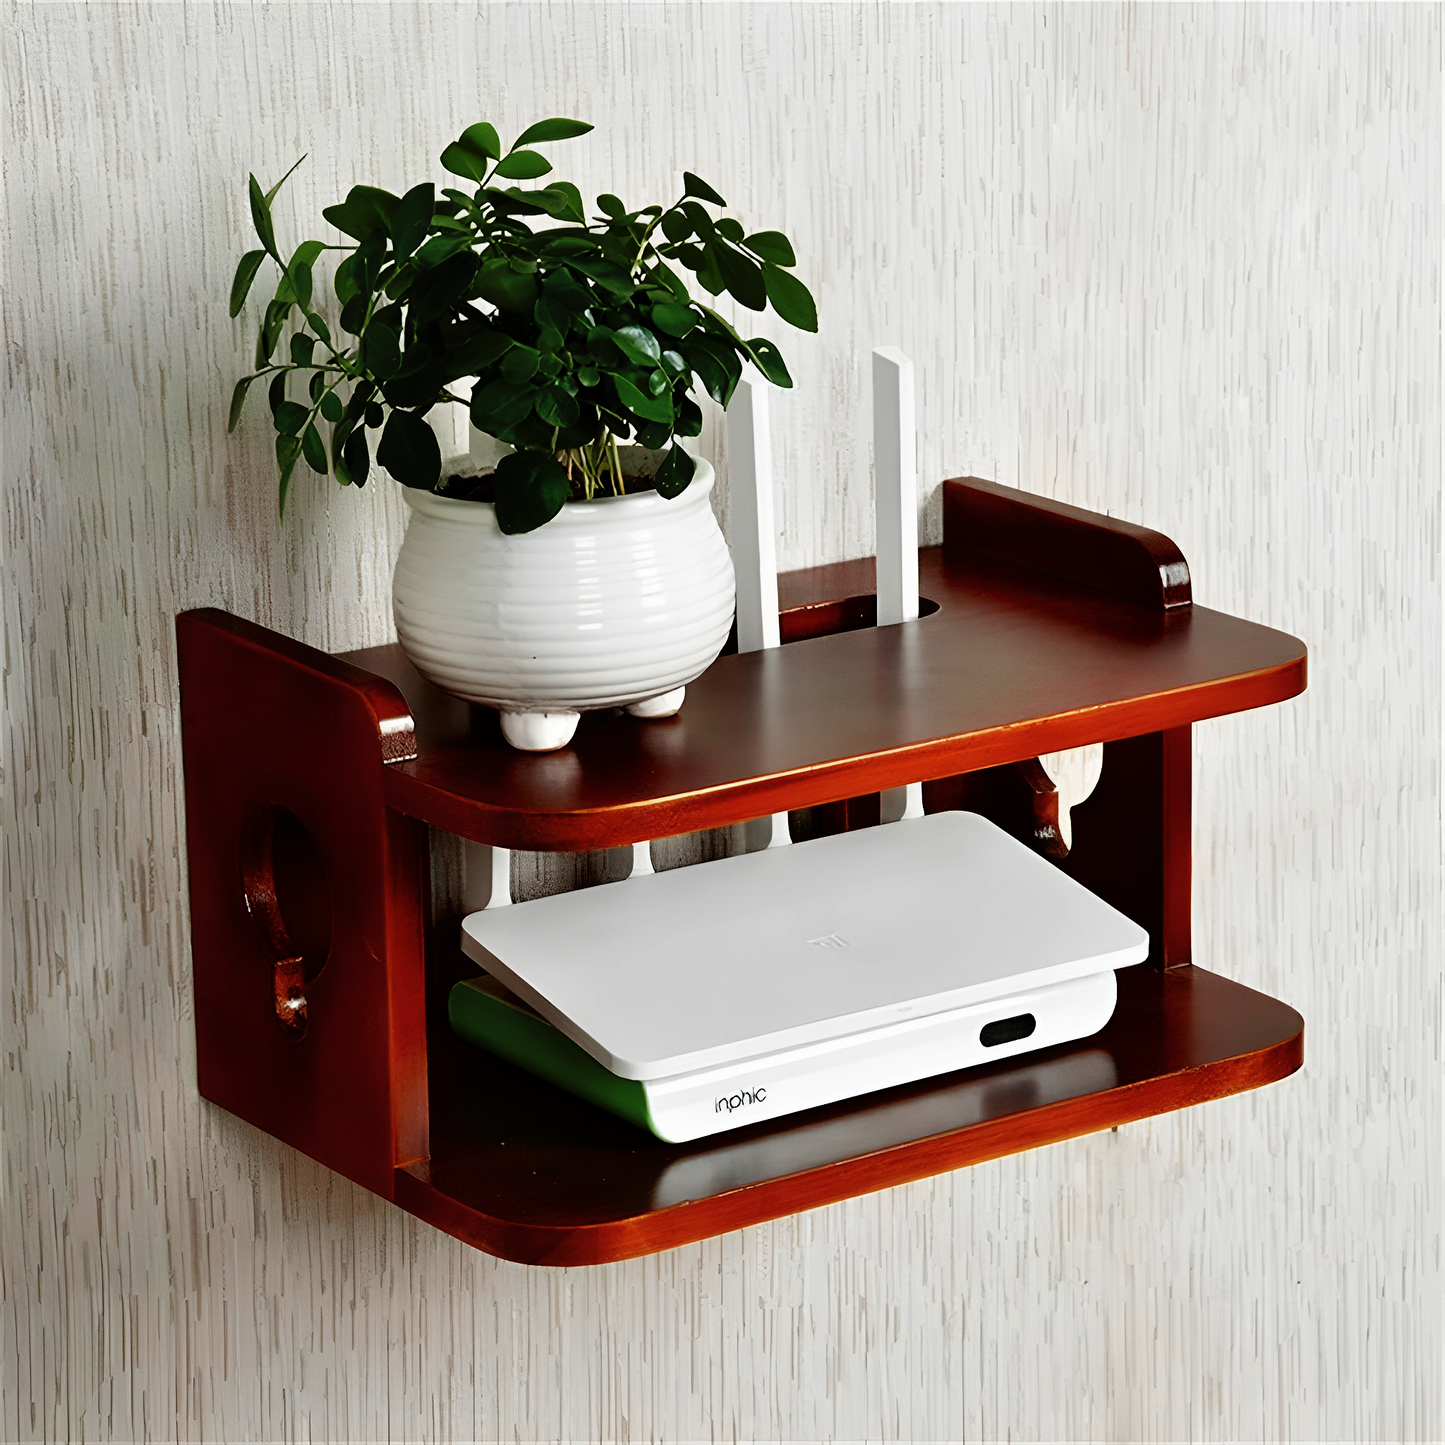 Wooden Wall Hanging Router Shelf For Office & Home